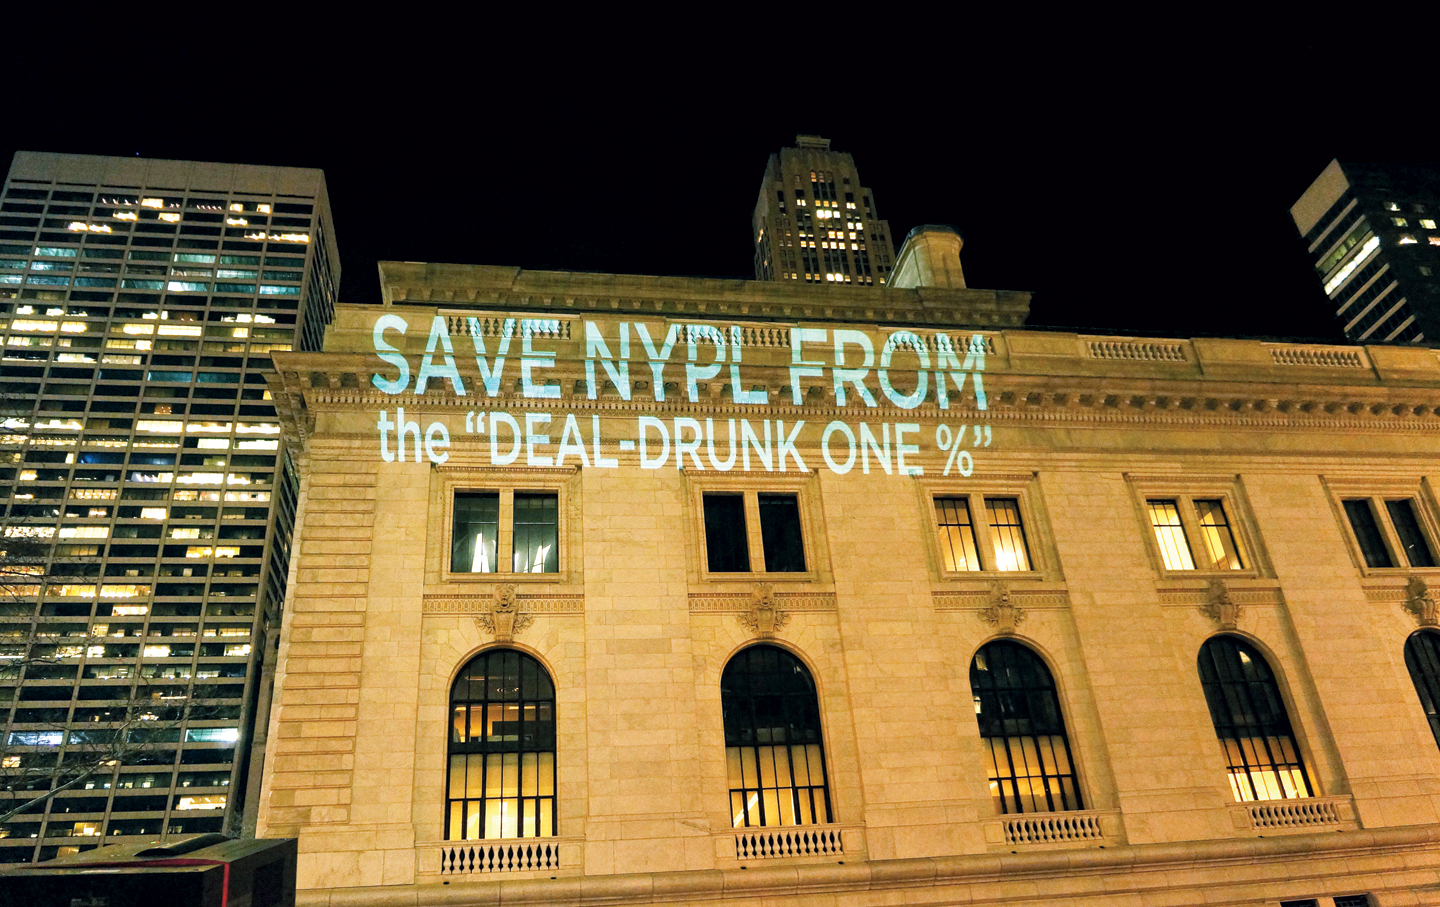 Protest at the New York Public Library, March 11, 2014.